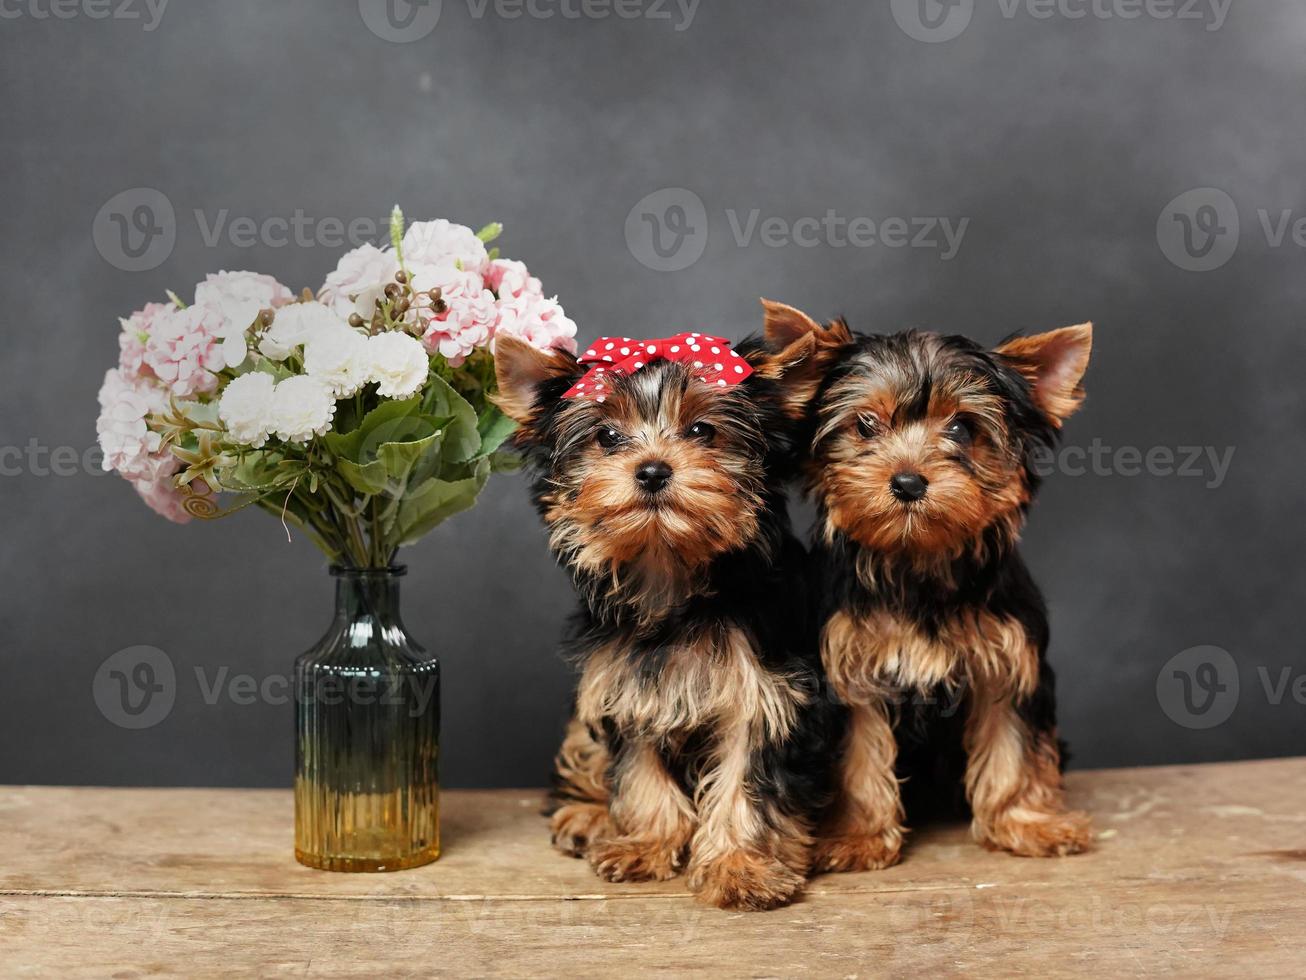 Two cute, furry Yokrshire Terrier Puppies Sitting on a wooden table, Posing on camera. The Puppy has a red bow on its head, next to it is a vase with pink flowers against a Black background photo